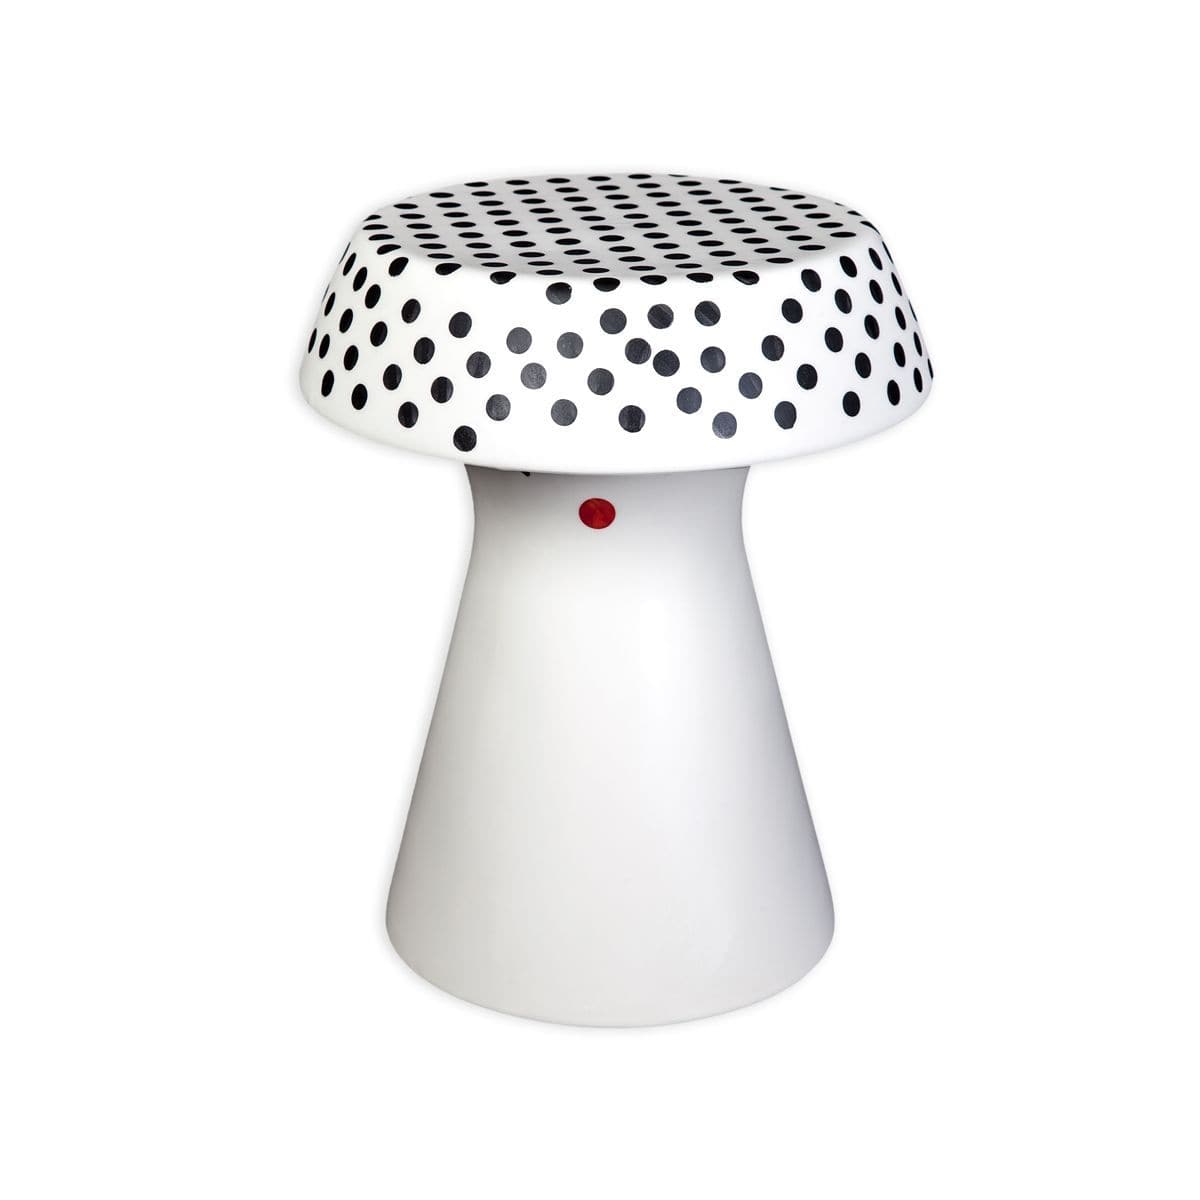 Ceramic Stool HOLLY Pois by Improntabarre 01